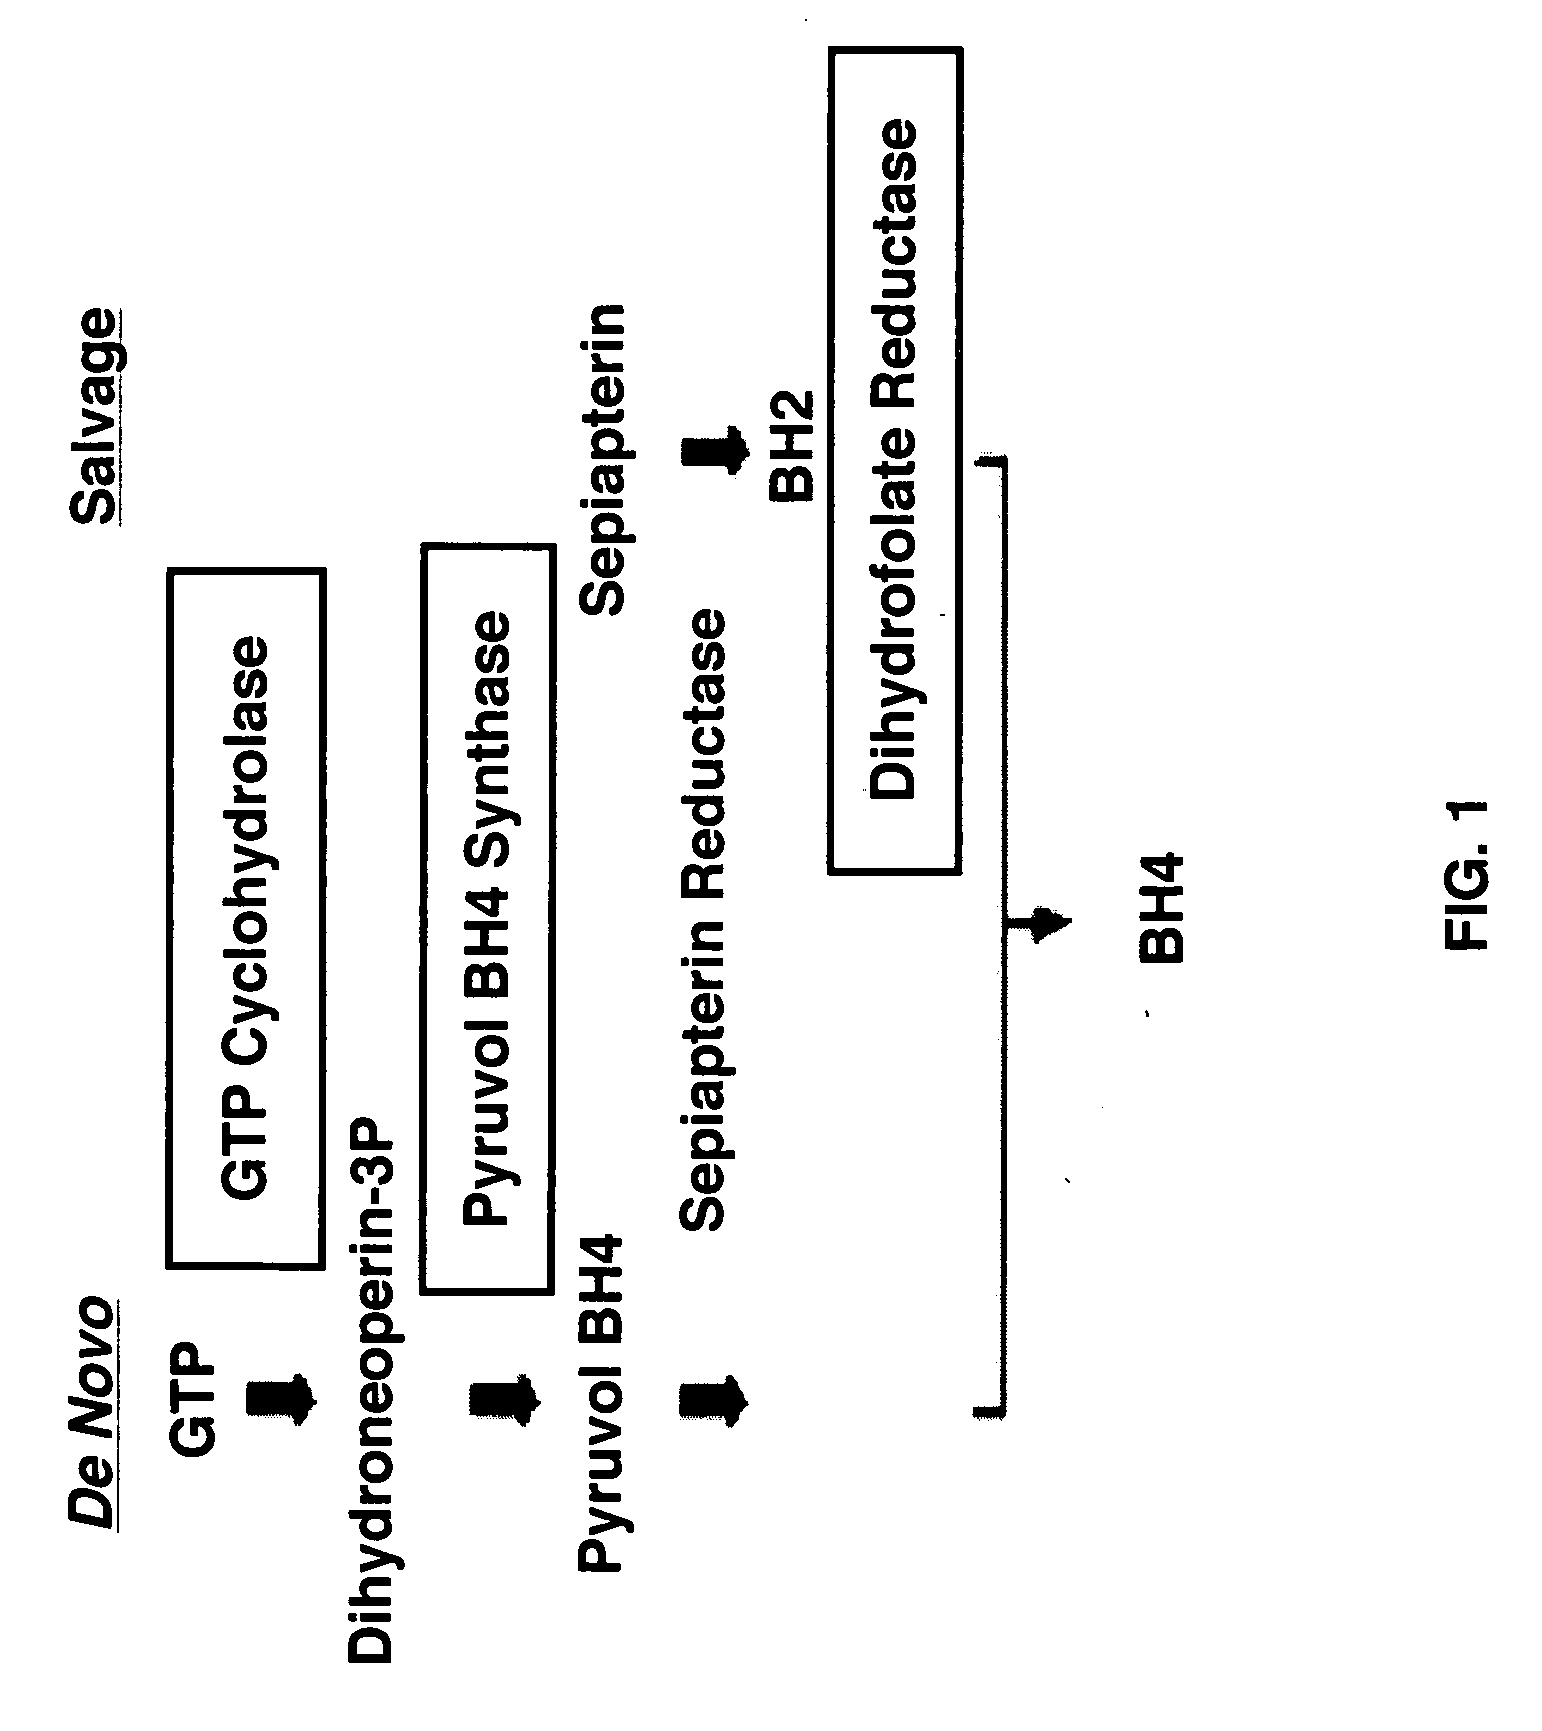 Uses of tetrahydrobiopterin, sepiapterin and derivatives thereof